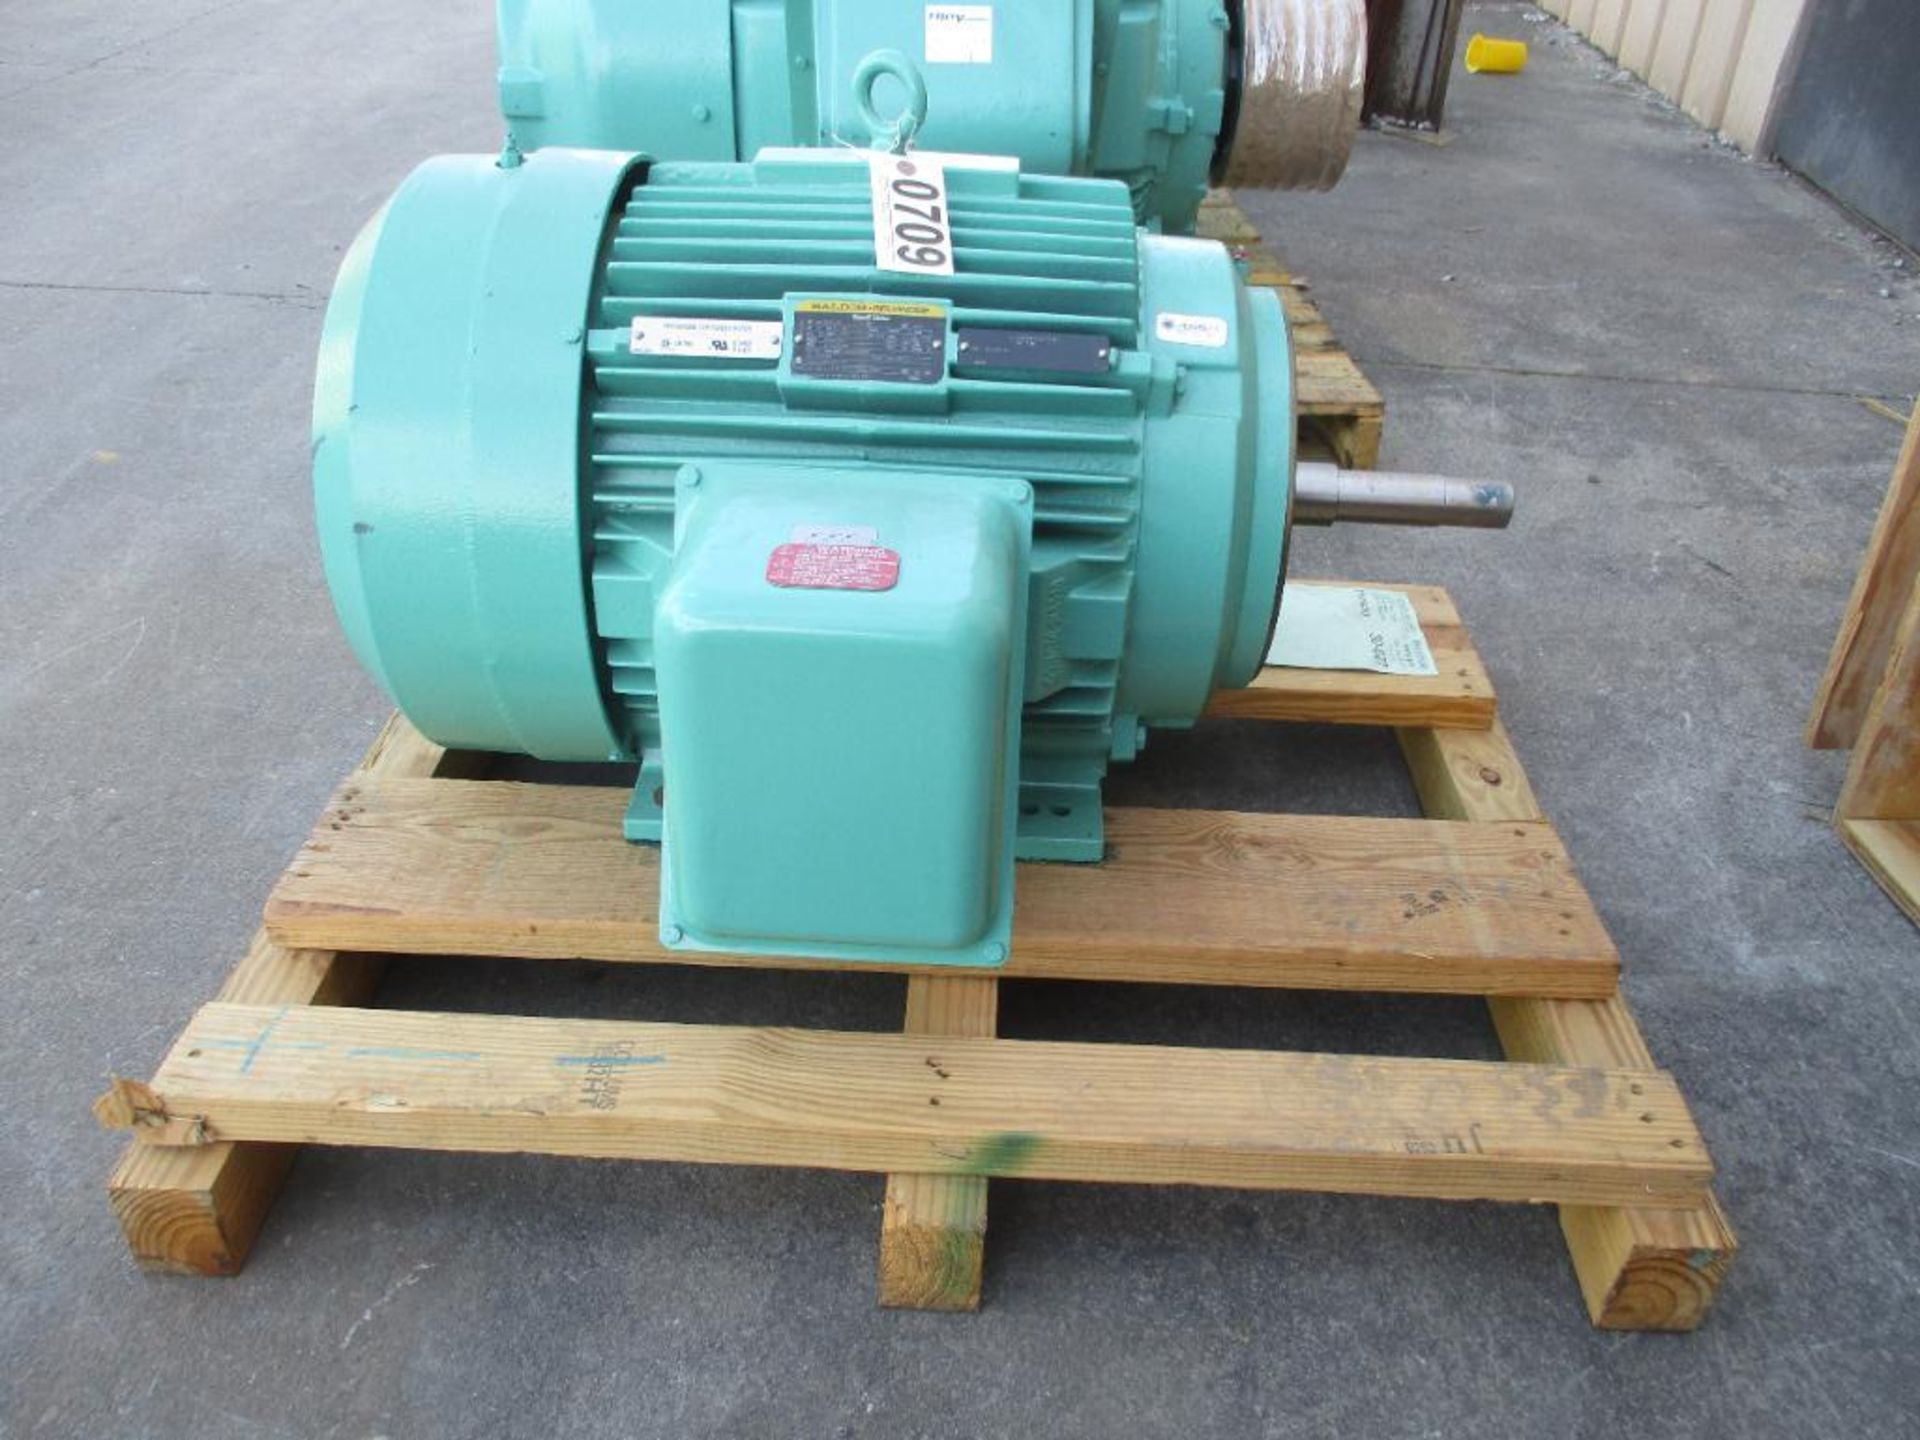 BALDOR-RELIANCE SUPER-E MOTOR A36-5299-1513 75HP 1780RPM FRAME 365JP 3 PHASE ELECTRIC MOTOR 985# LBS - Image 3 of 5